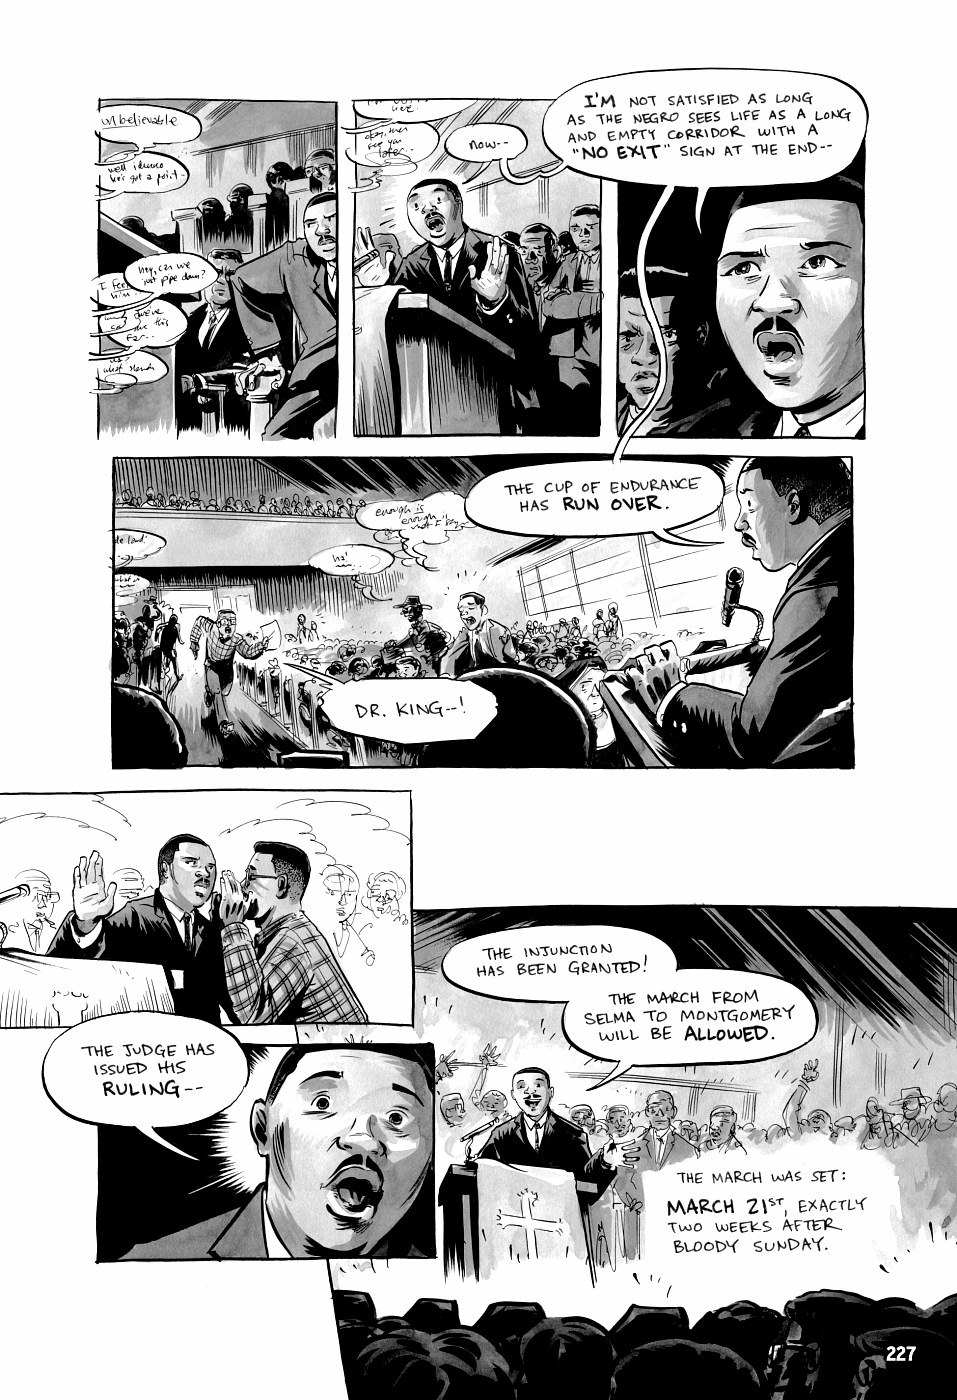 page 227 of march book three graphic novel